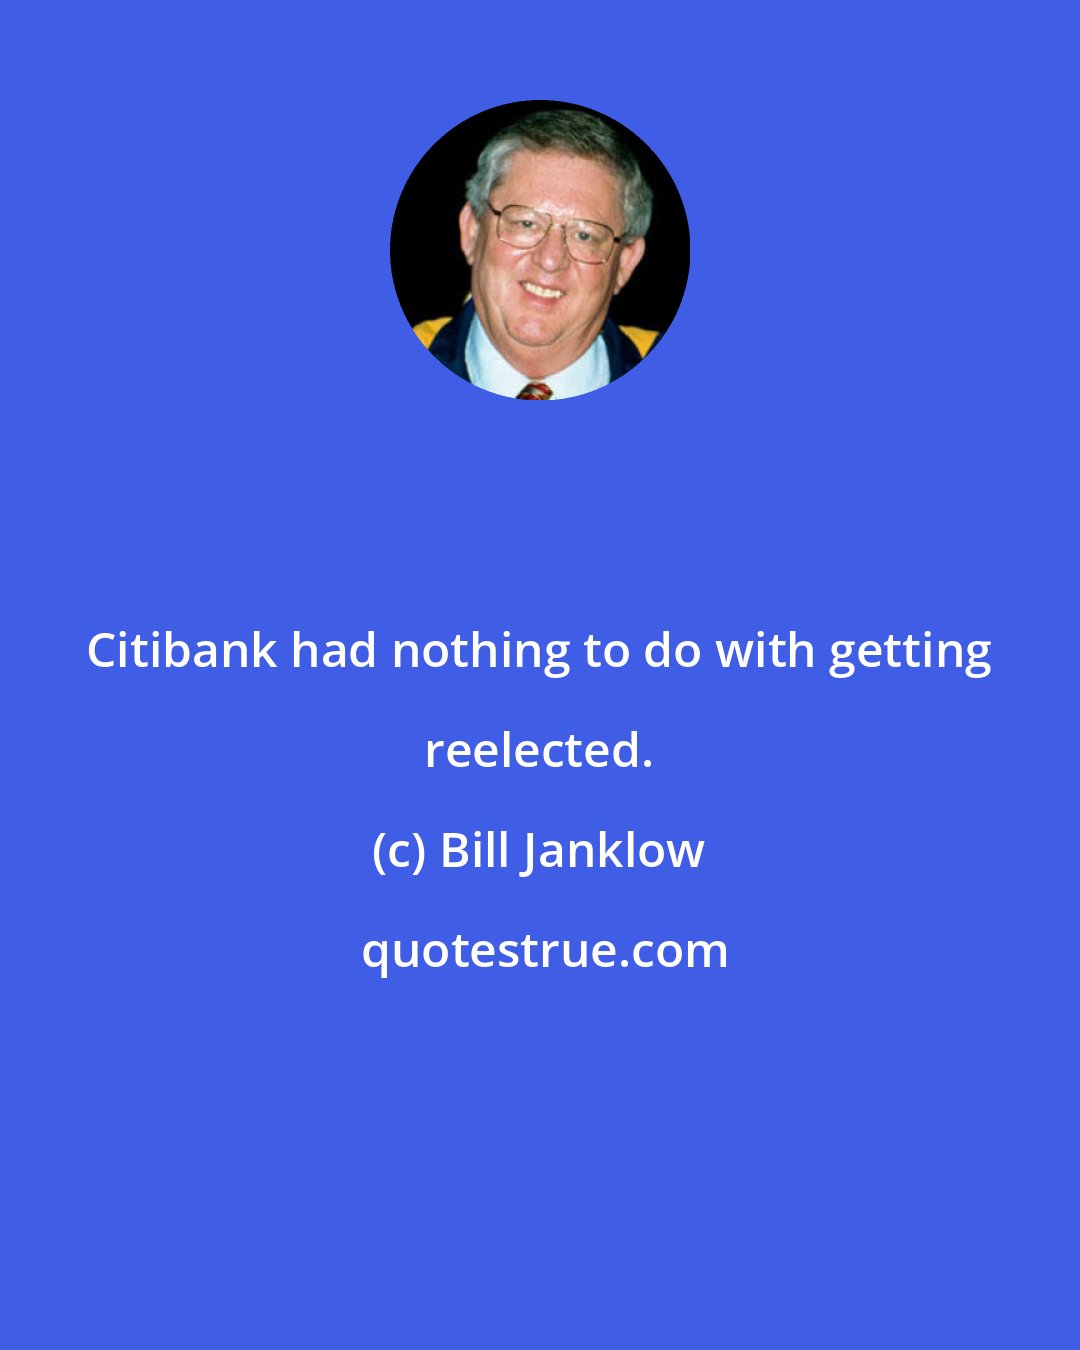 Bill Janklow: Citibank had nothing to do with getting reelected.